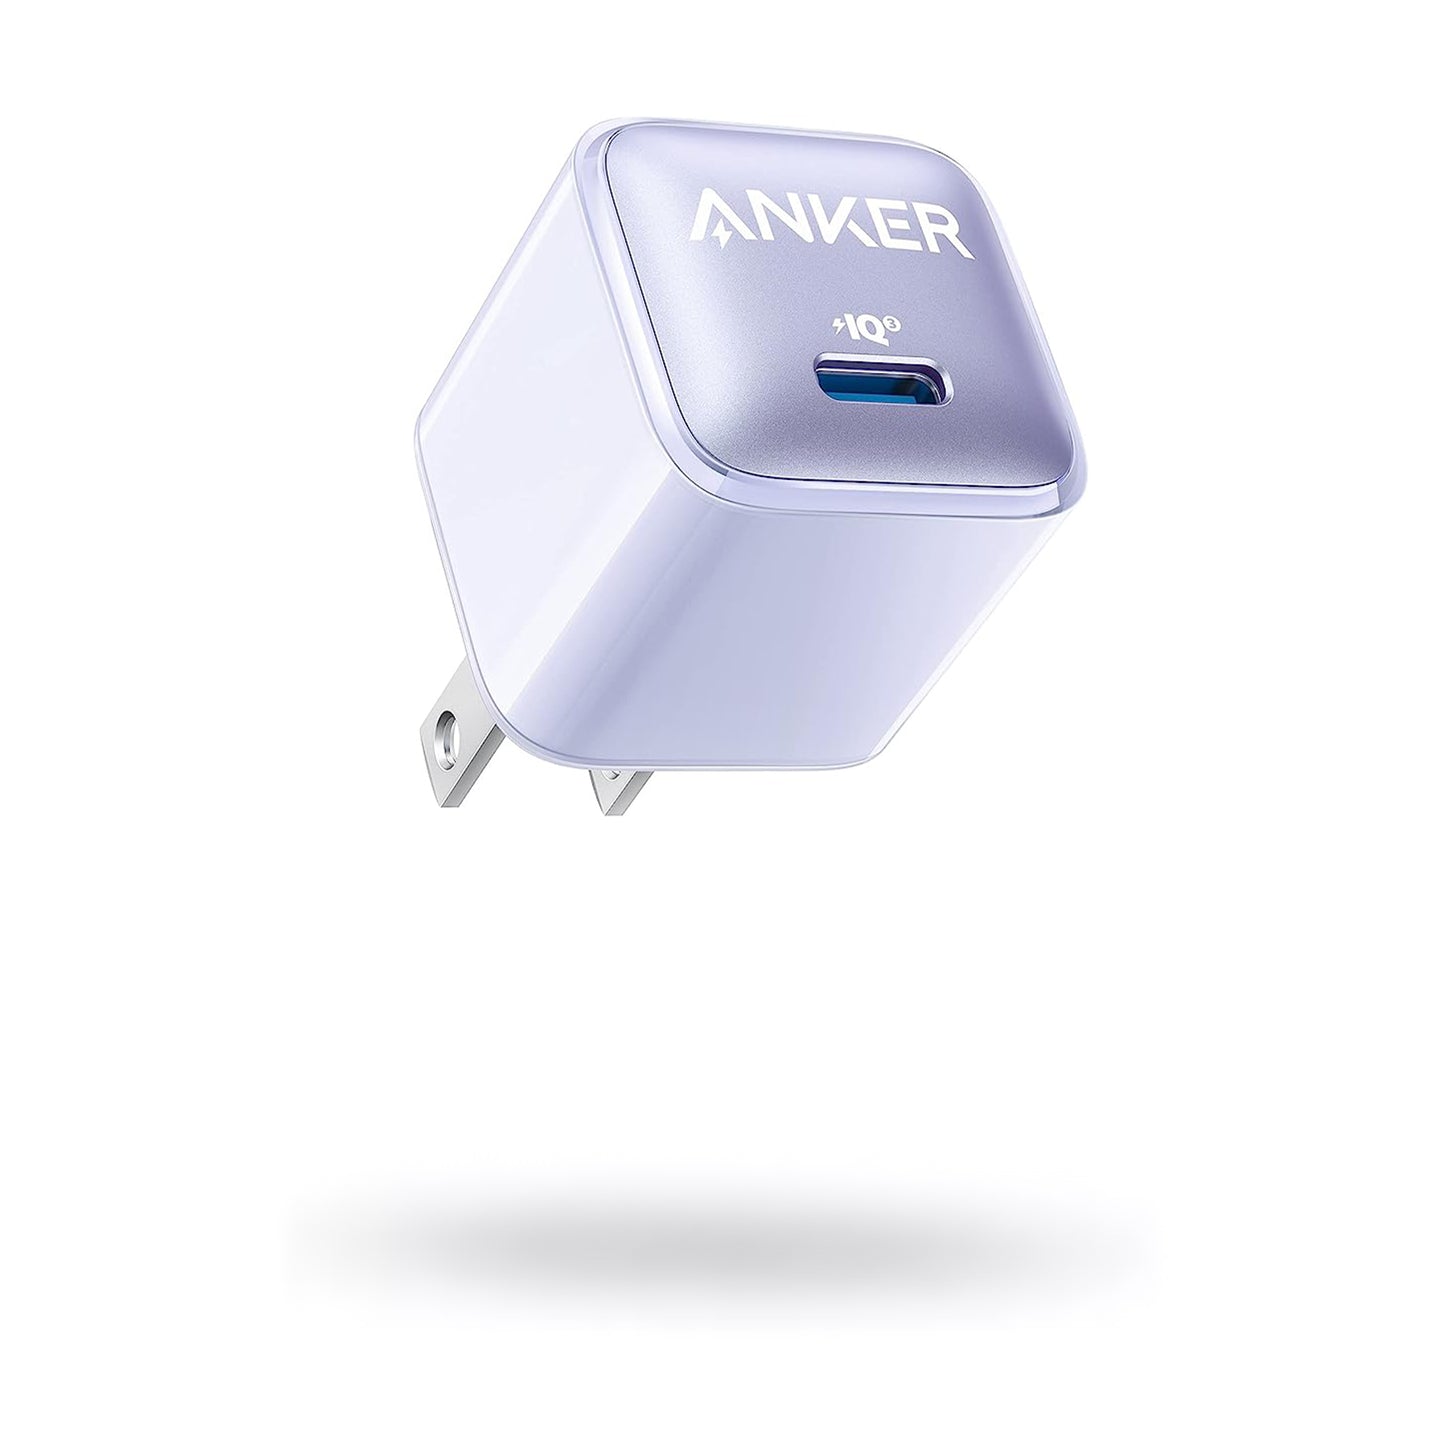 Anker's Nano 3 USB-C charger is even smaller, more colorful, and still 30W  - The Verge